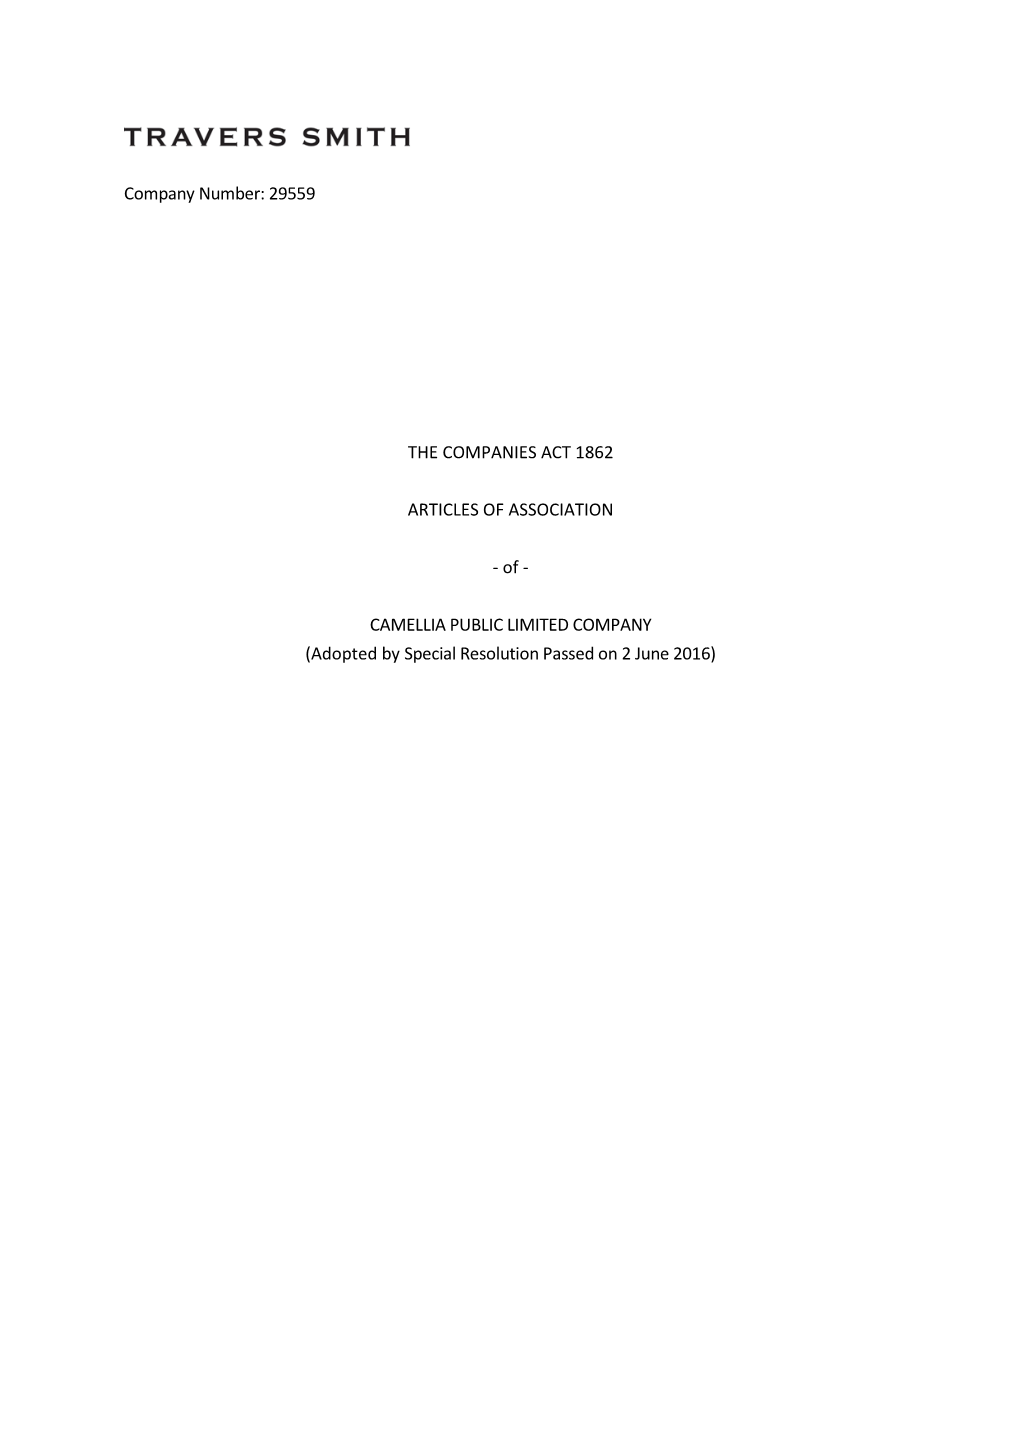 29559 the Companies Act 1862 Articles of Association